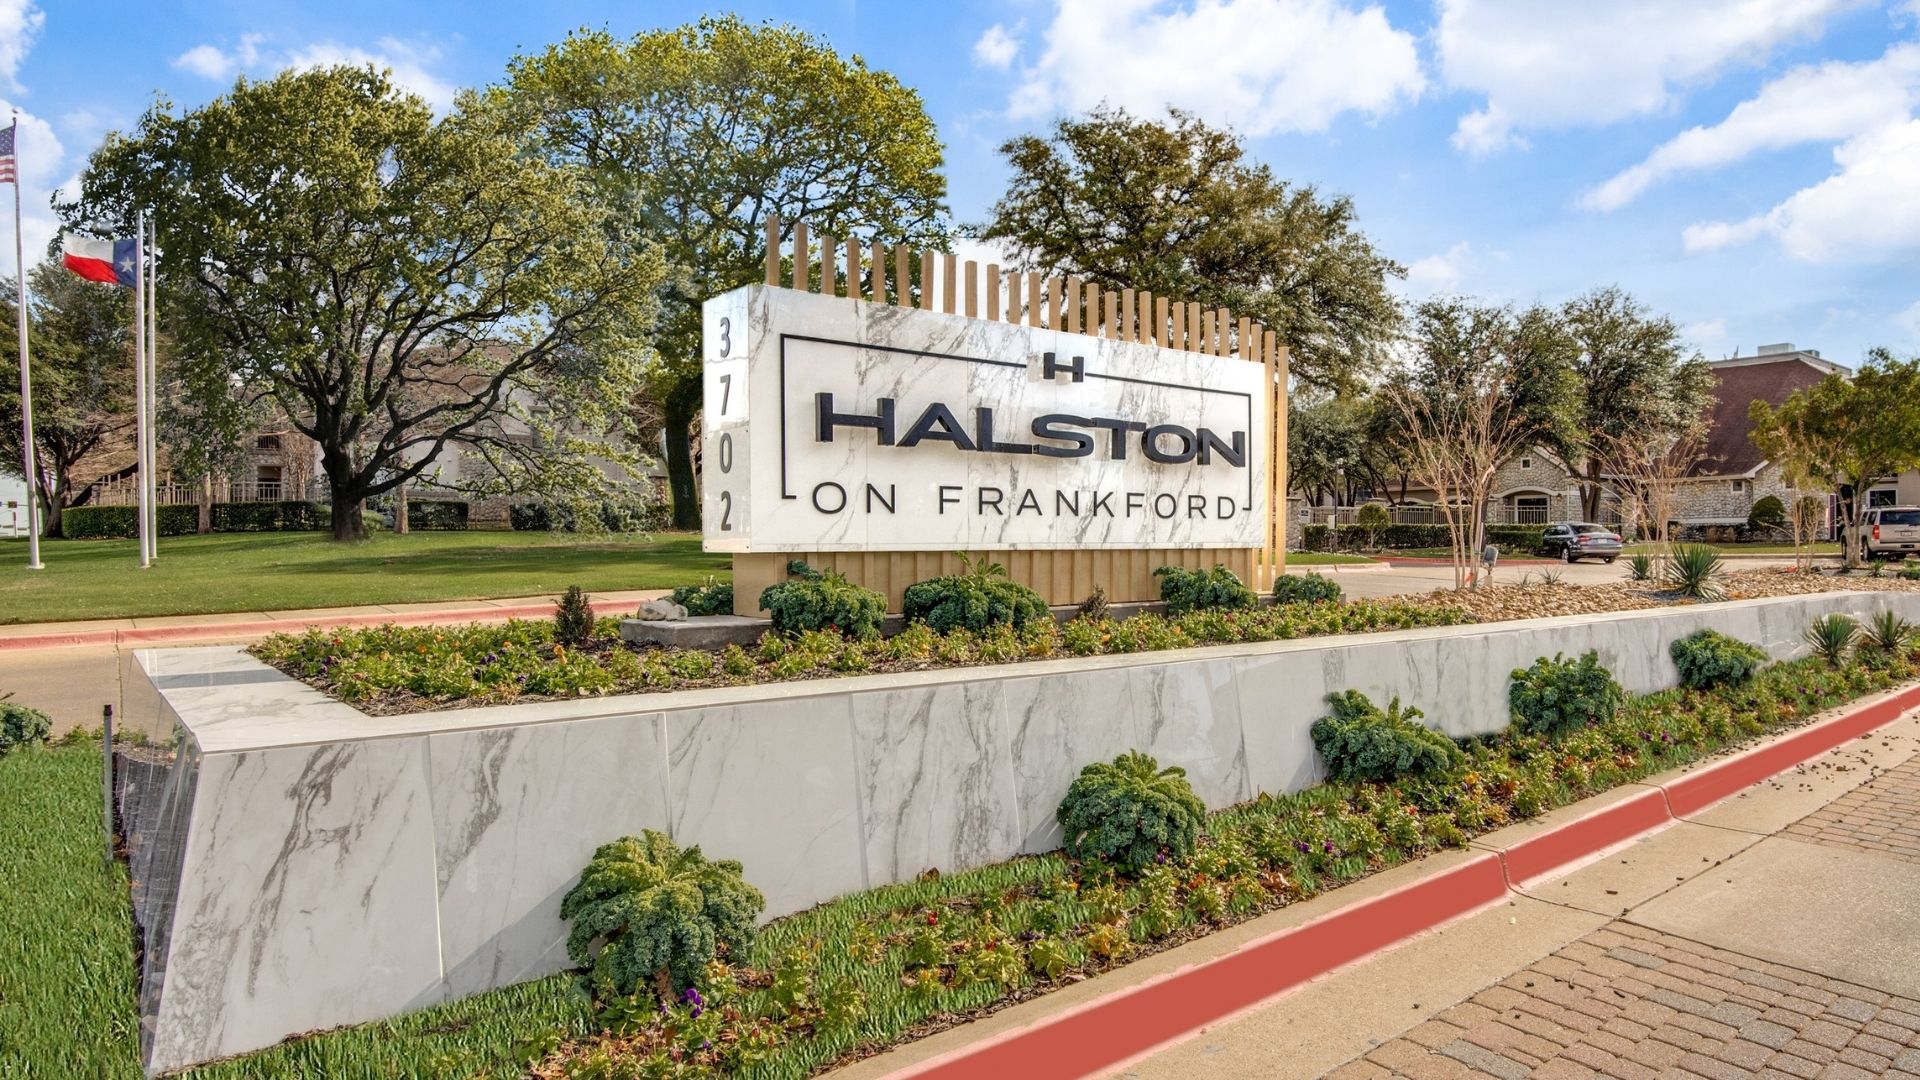 Halston Frankford New Renovated Monument sign 2021